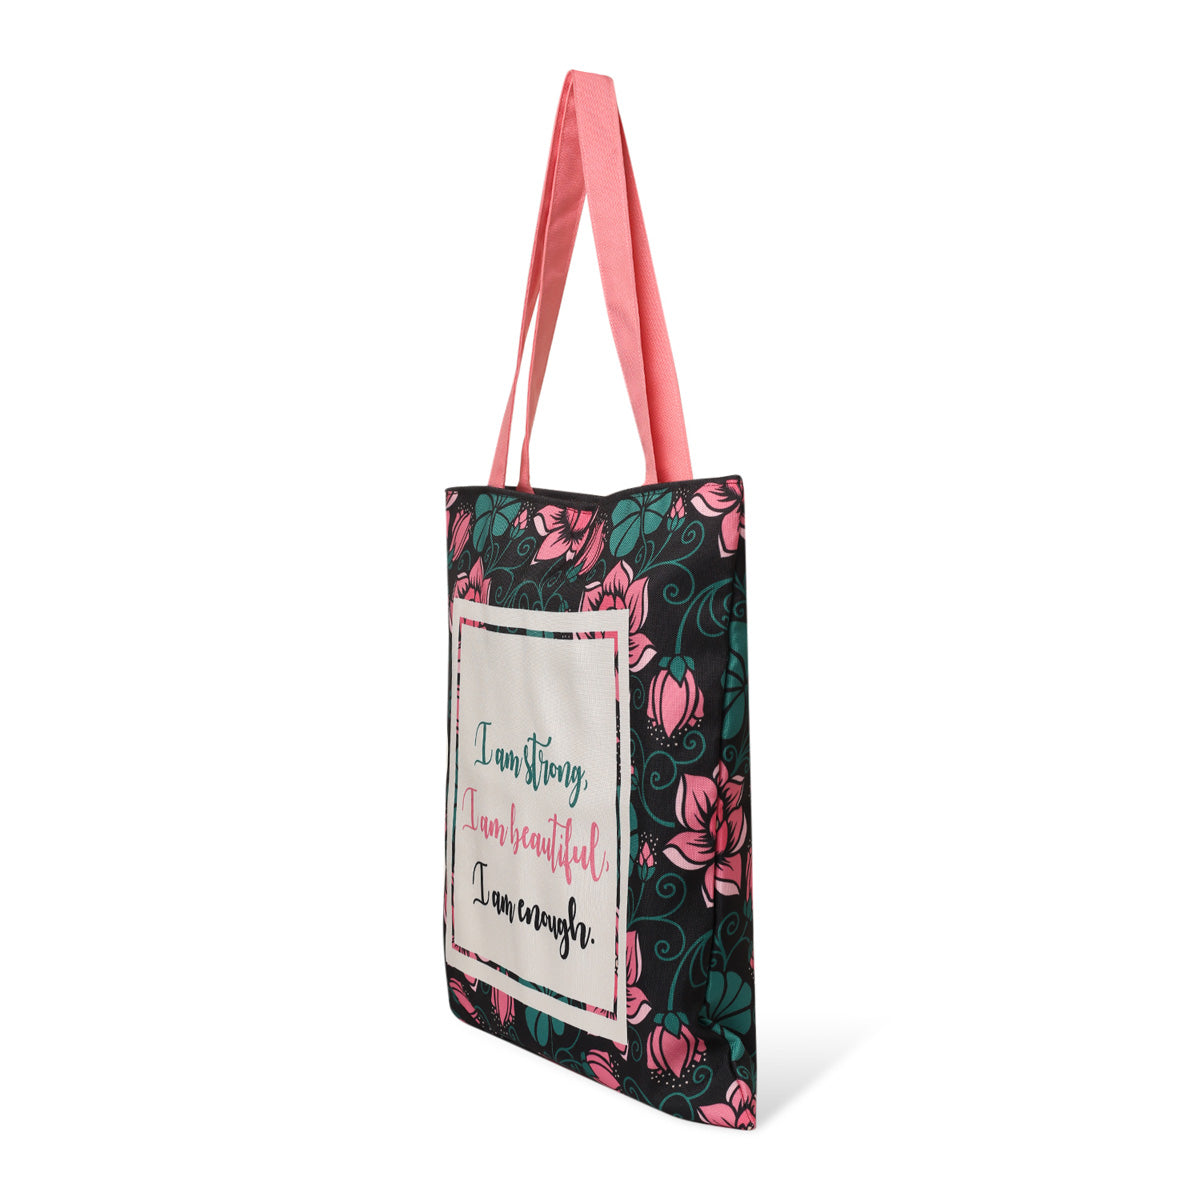 Side view of A tote bag with the quote "I am strong, I am beautiful, I am strong" on it.